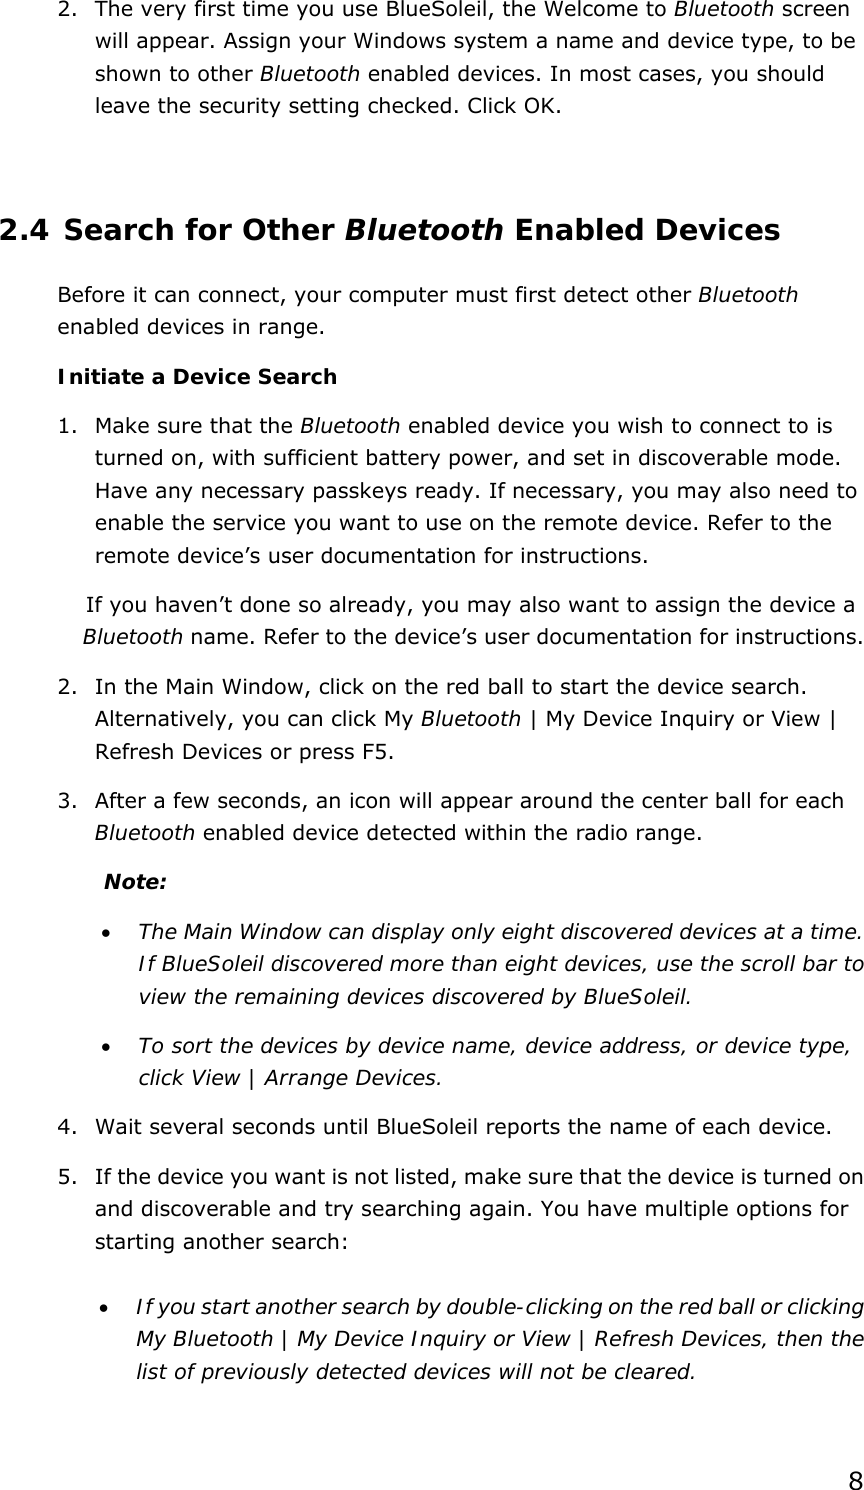  82. The very first time you use BlueSoleil, the Welcome to Bluetooth screen will appear. Assign your Windows system a name and device type, to be shown to other Bluetooth enabled devices. In most cases, you should leave the security setting checked. Click OK.  2.4 Search for Other Bluetooth Enabled Devices Before it can connect, your computer must first detect other Bluetooth enabled devices in range. Initiate a Device Search 1. Make sure that the Bluetooth enabled device you wish to connect to is turned on, with sufficient battery power, and set in discoverable mode. Have any necessary passkeys ready. If necessary, you may also need to enable the service you want to use on the remote device. Refer to the remote device’s user documentation for instructions. If you haven’t done so already, you may also want to assign the device a Bluetooth name. Refer to the device’s user documentation for instructions. 2. In the Main Window, click on the red ball to start the device search. Alternatively, you can click My Bluetooth | My Device Inquiry or View | Refresh Devices or press F5. 3. After a few seconds, an icon will appear around the center ball for each Bluetooth enabled device detected within the radio range. Note:  • The Main Window can display only eight discovered devices at a time. If BlueSoleil discovered more than eight devices, use the scroll bar to view the remaining devices discovered by BlueSoleil. • To sort the devices by device name, device address, or device type, click View | Arrange Devices. 4. Wait several seconds until BlueSoleil reports the name of each device. 5. If the device you want is not listed, make sure that the device is turned on and discoverable and try searching again. You have multiple options for starting another search:  • If you start another search by double-clicking on the red ball or clicking My Bluetooth | My Device Inquiry or View | Refresh Devices, then the list of previously detected devices will not be cleared. 